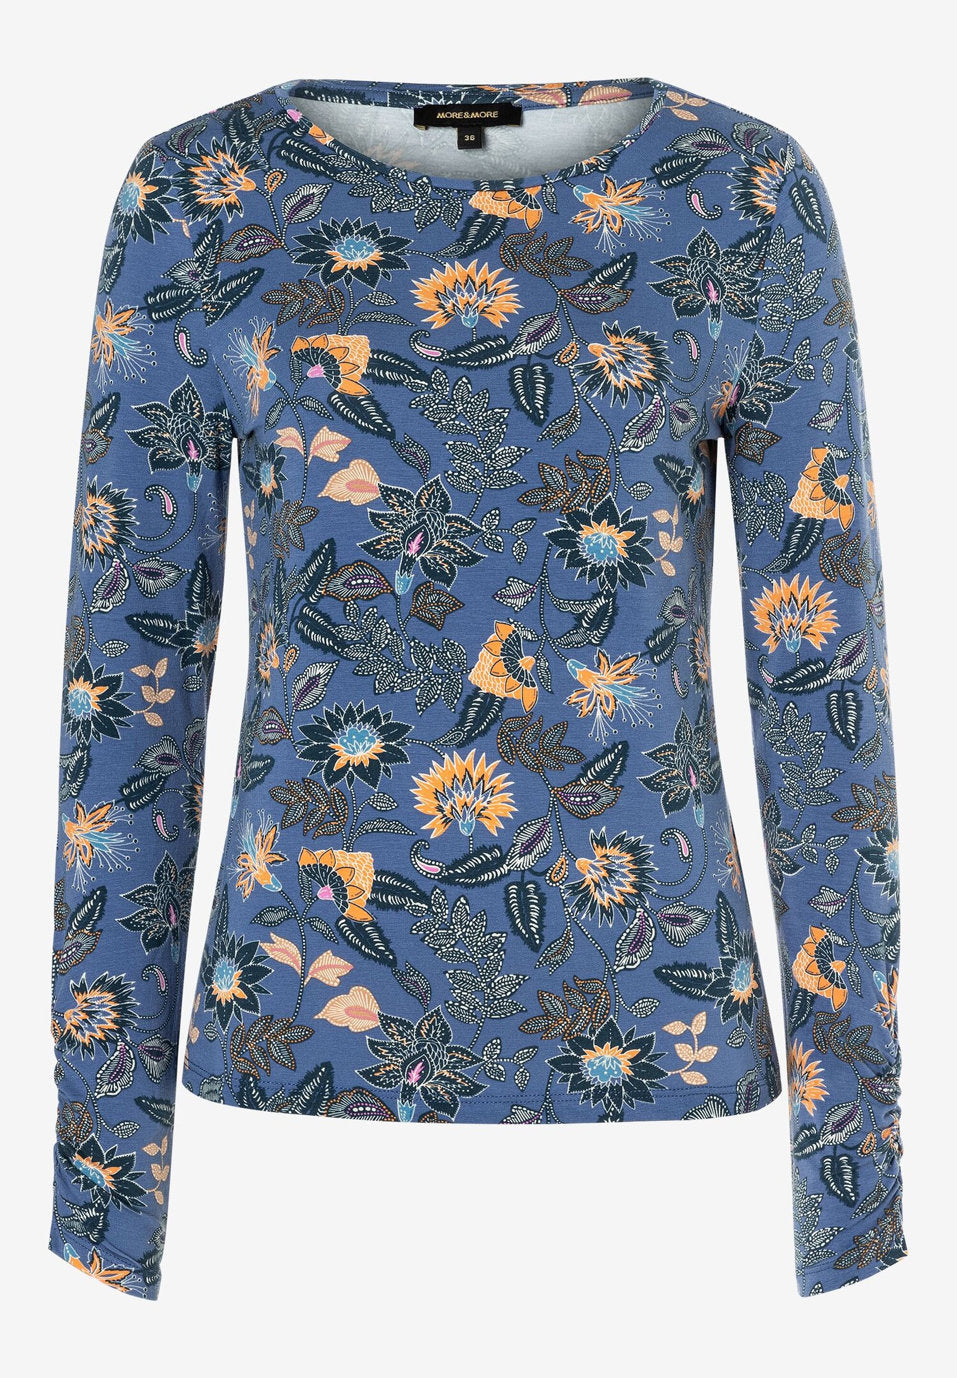 Long-Sleeved Shirt With Paisley Print, Smoke Blue, Autumn Collection_31090003_5322_01